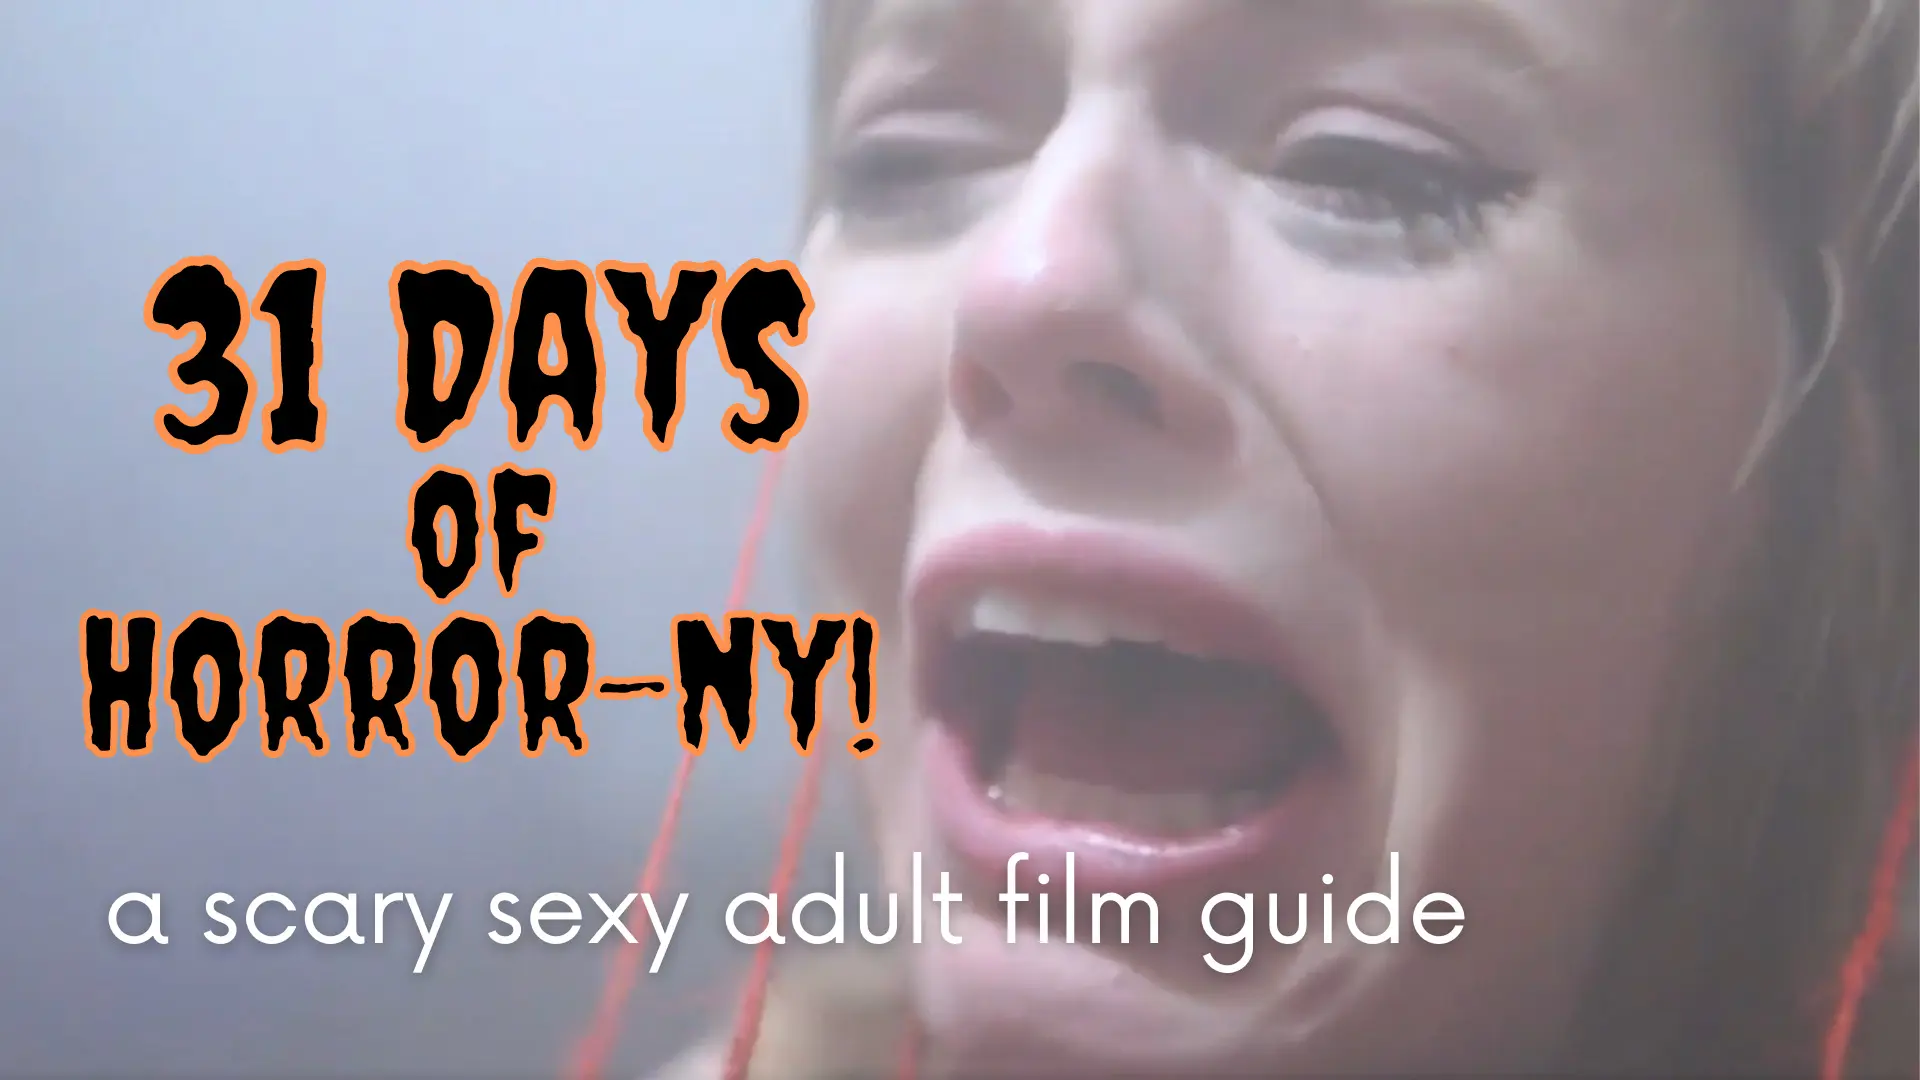 Full Saxy Films - 31 Days of Horror-ny! Scary Sexy Adult Films - PinkLabel.TV